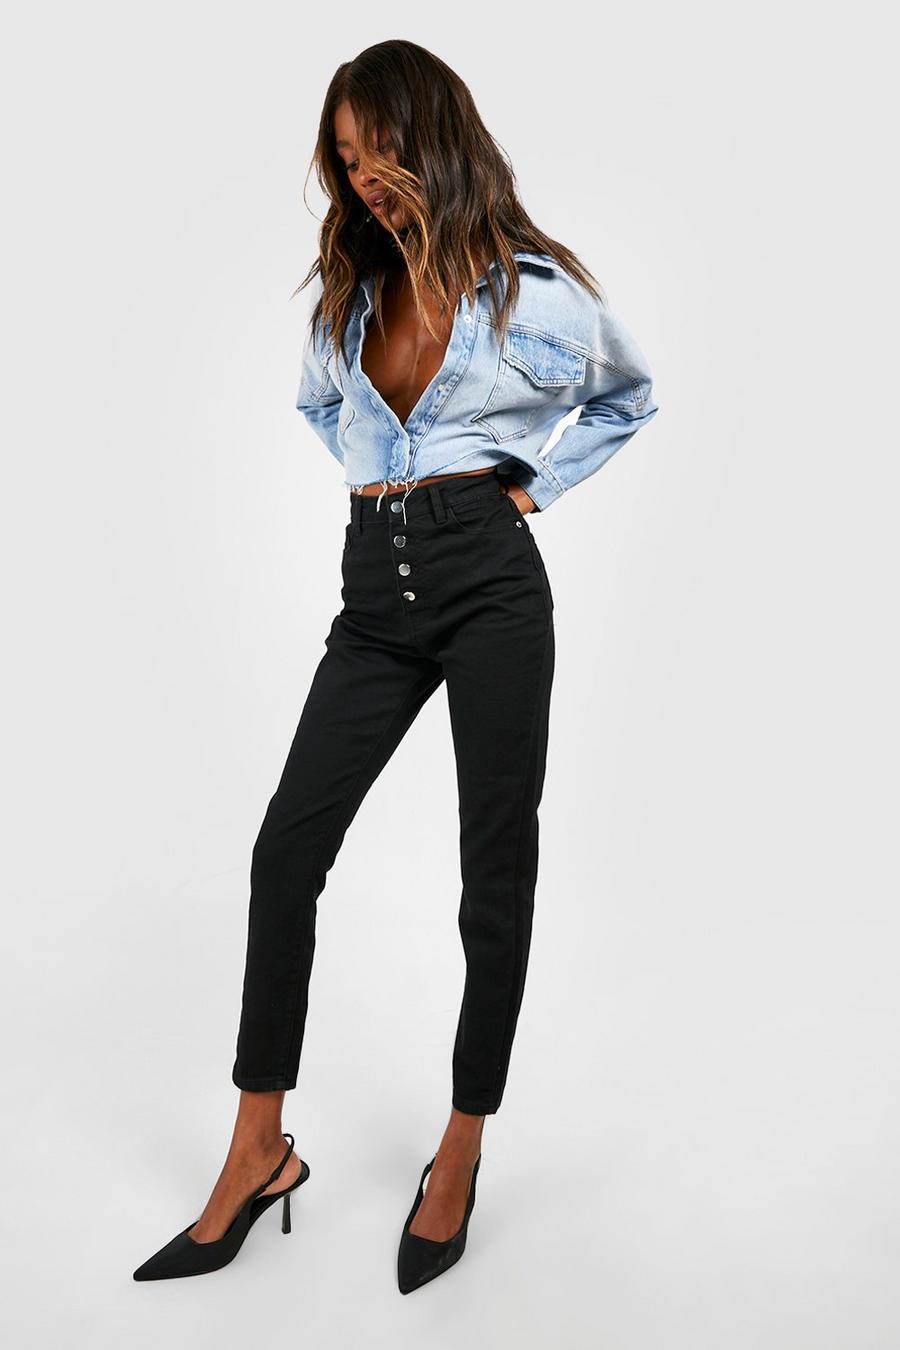 Black Basics High Waisted Exposed Button Skinny Jeans